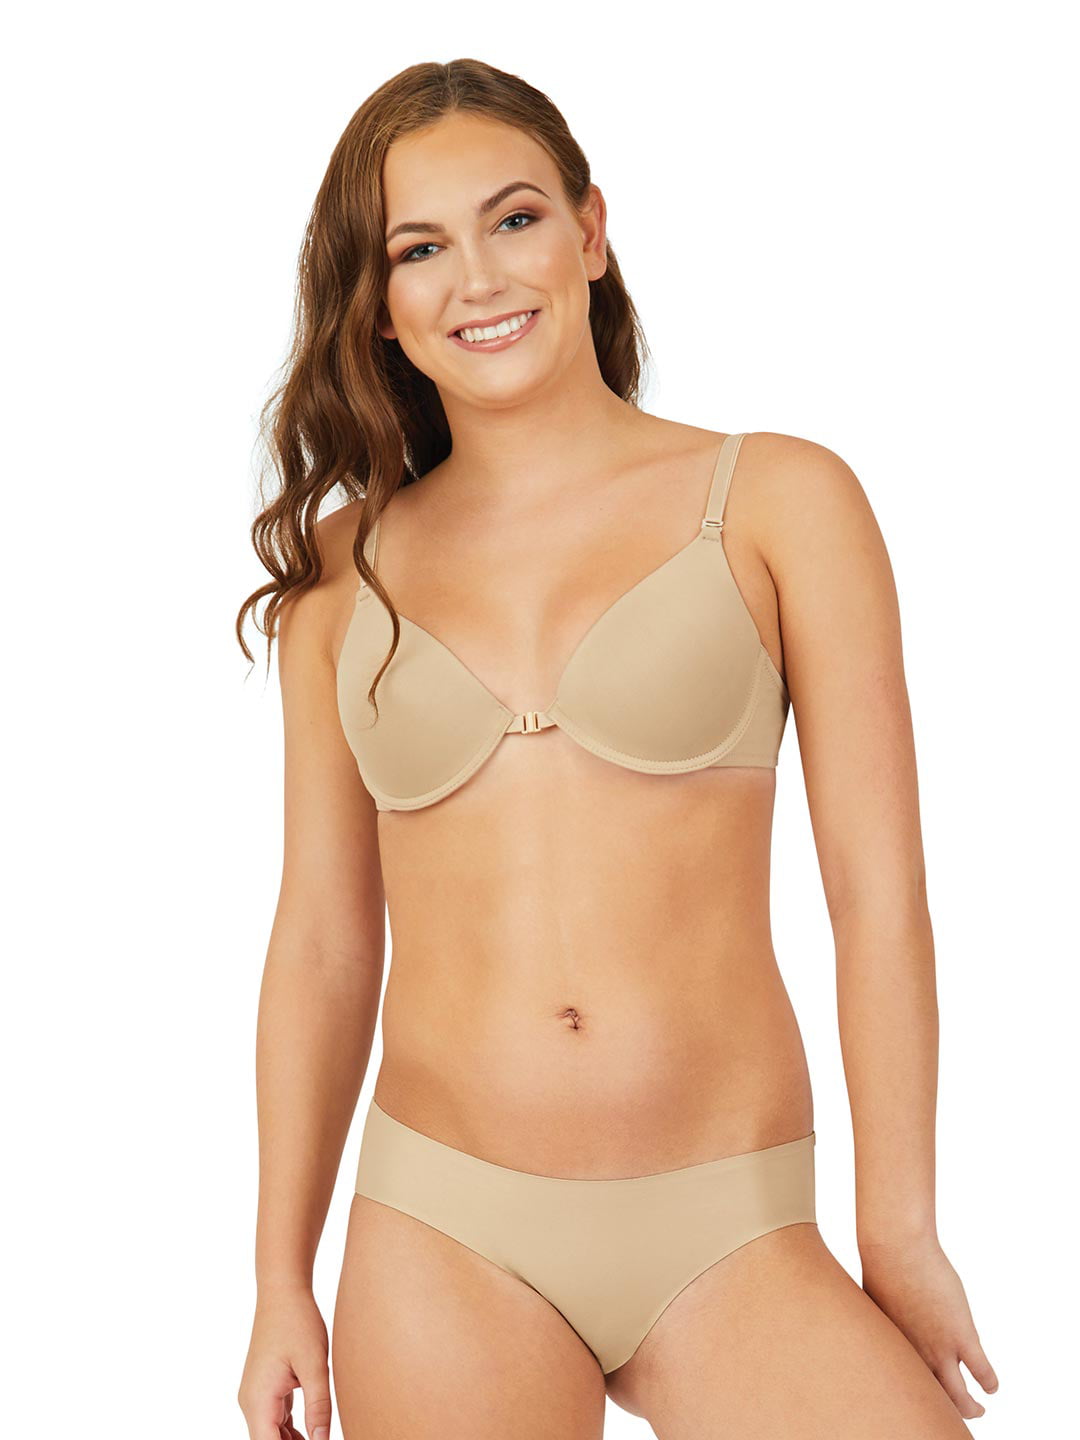 SOOMLON Bras for Women No Underwire Breathable Gathered No